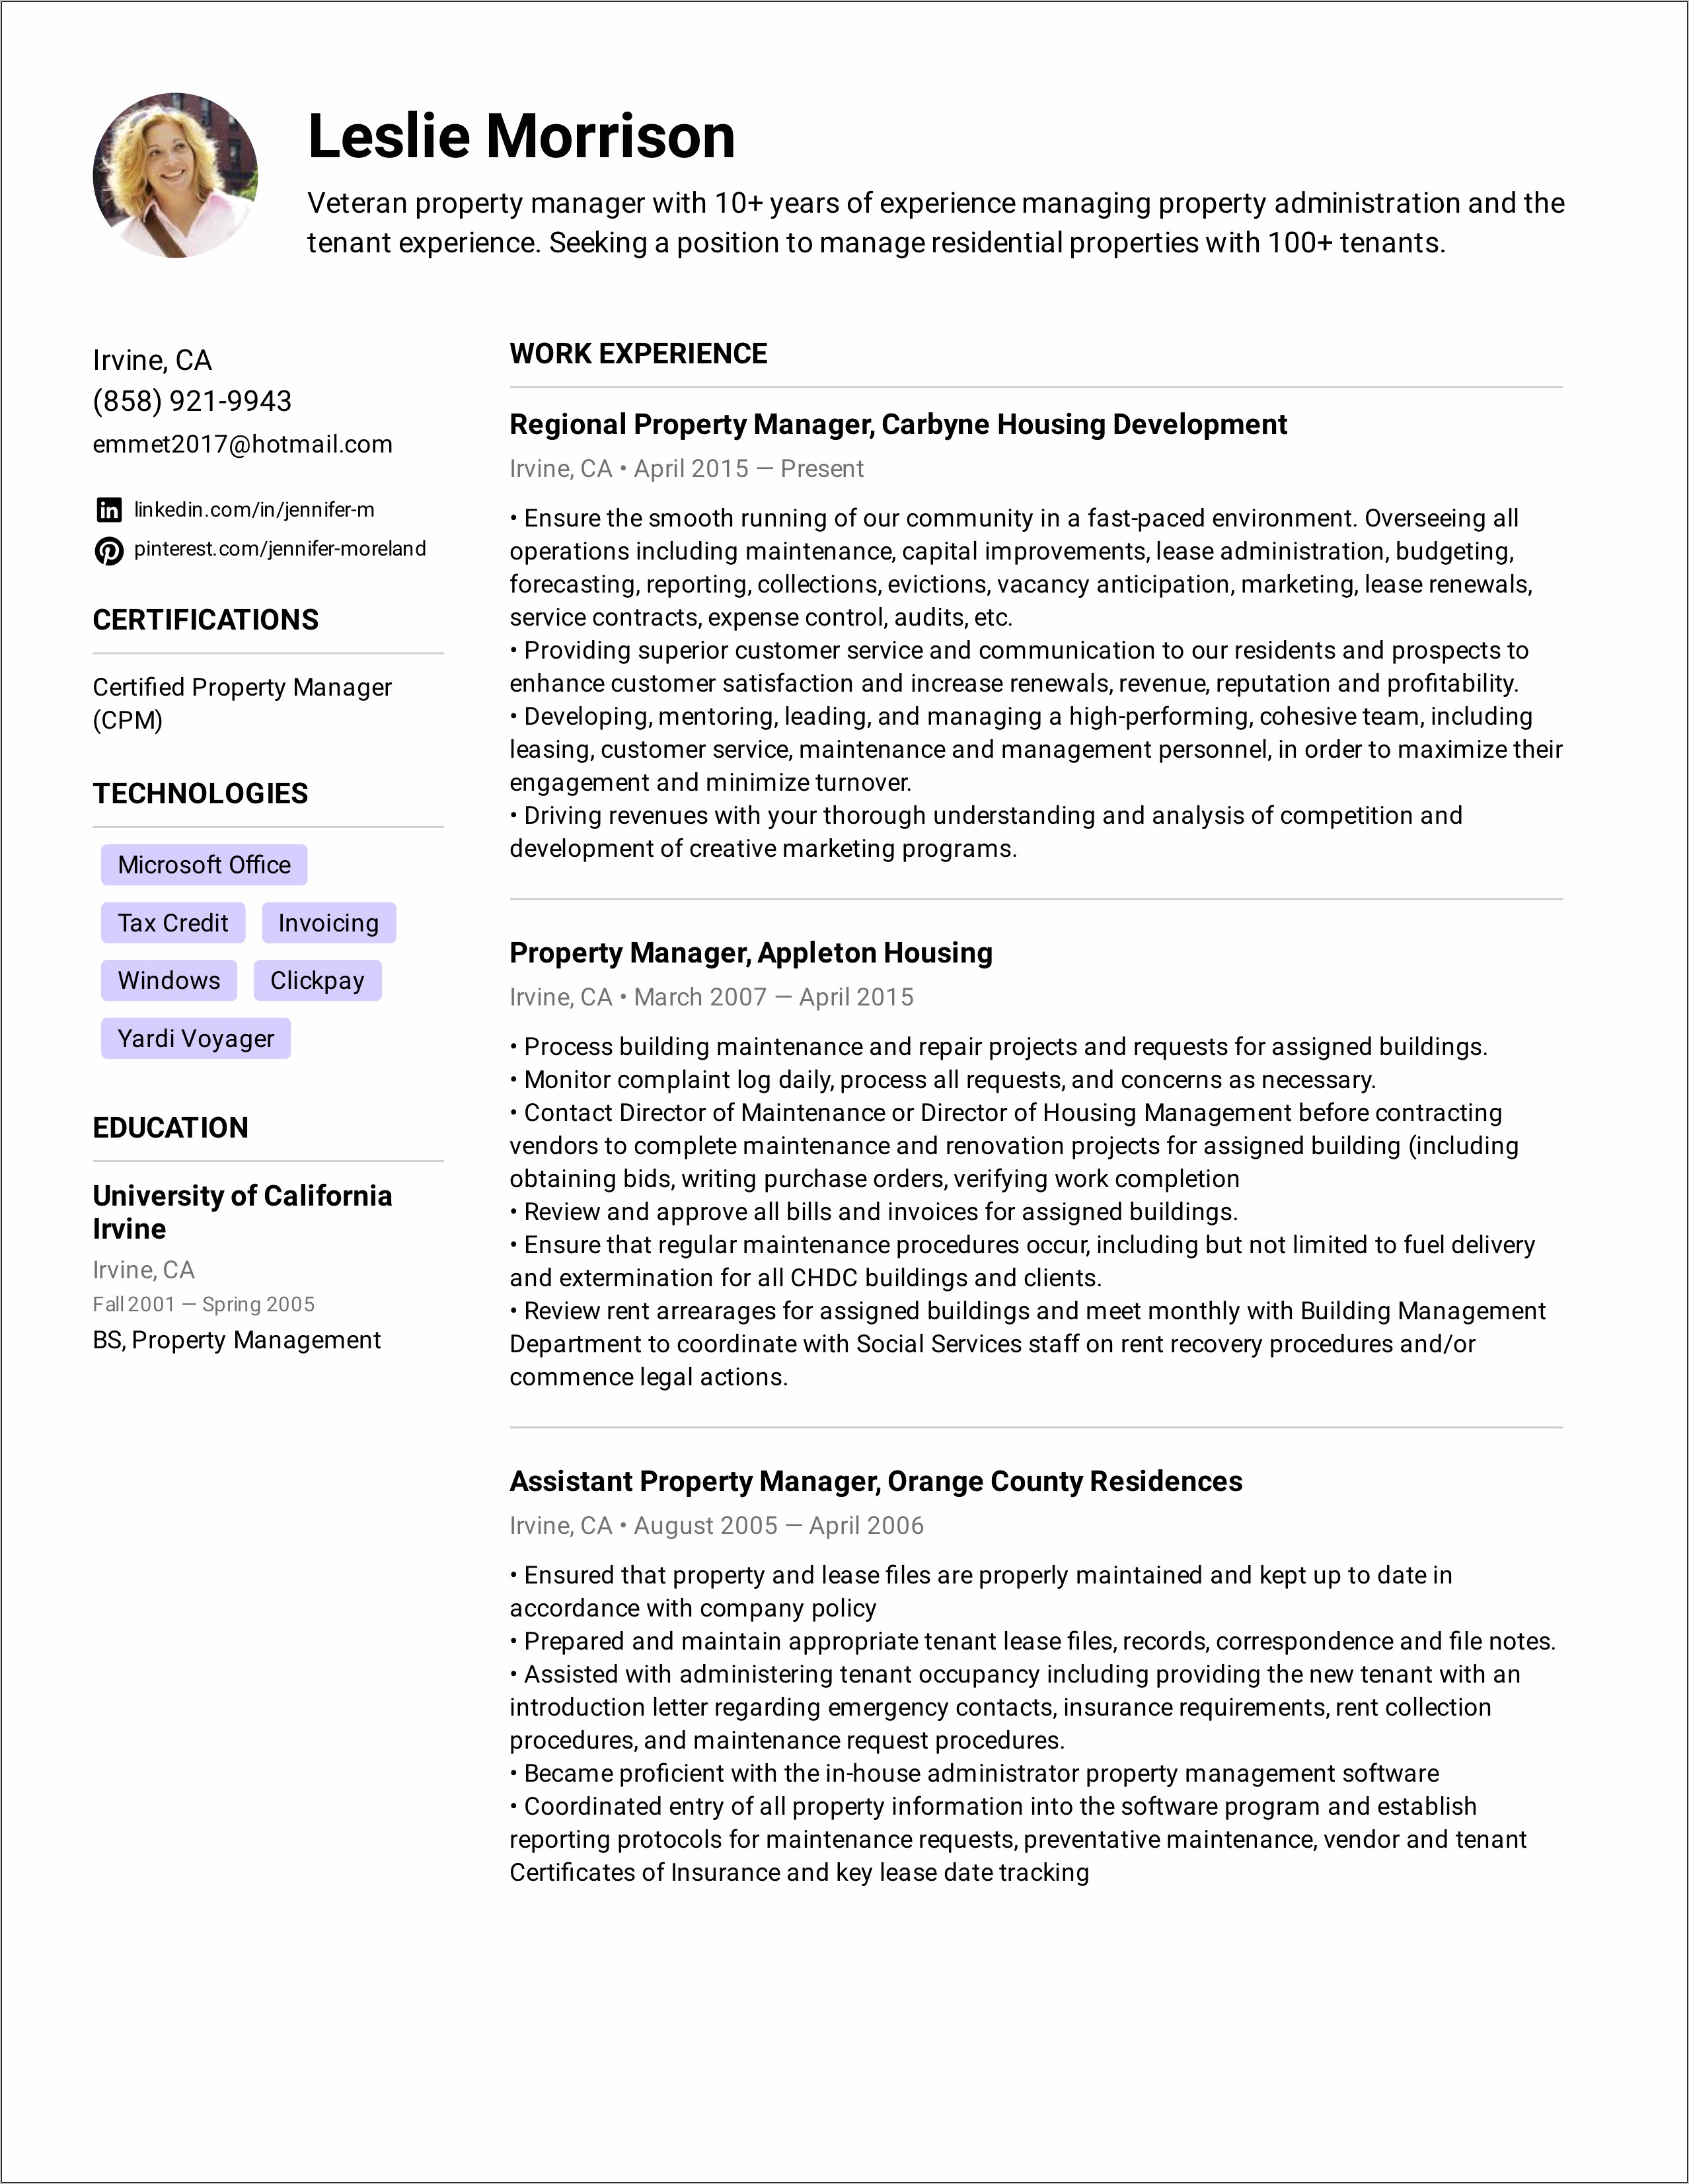 Resume Companies For Property Manager